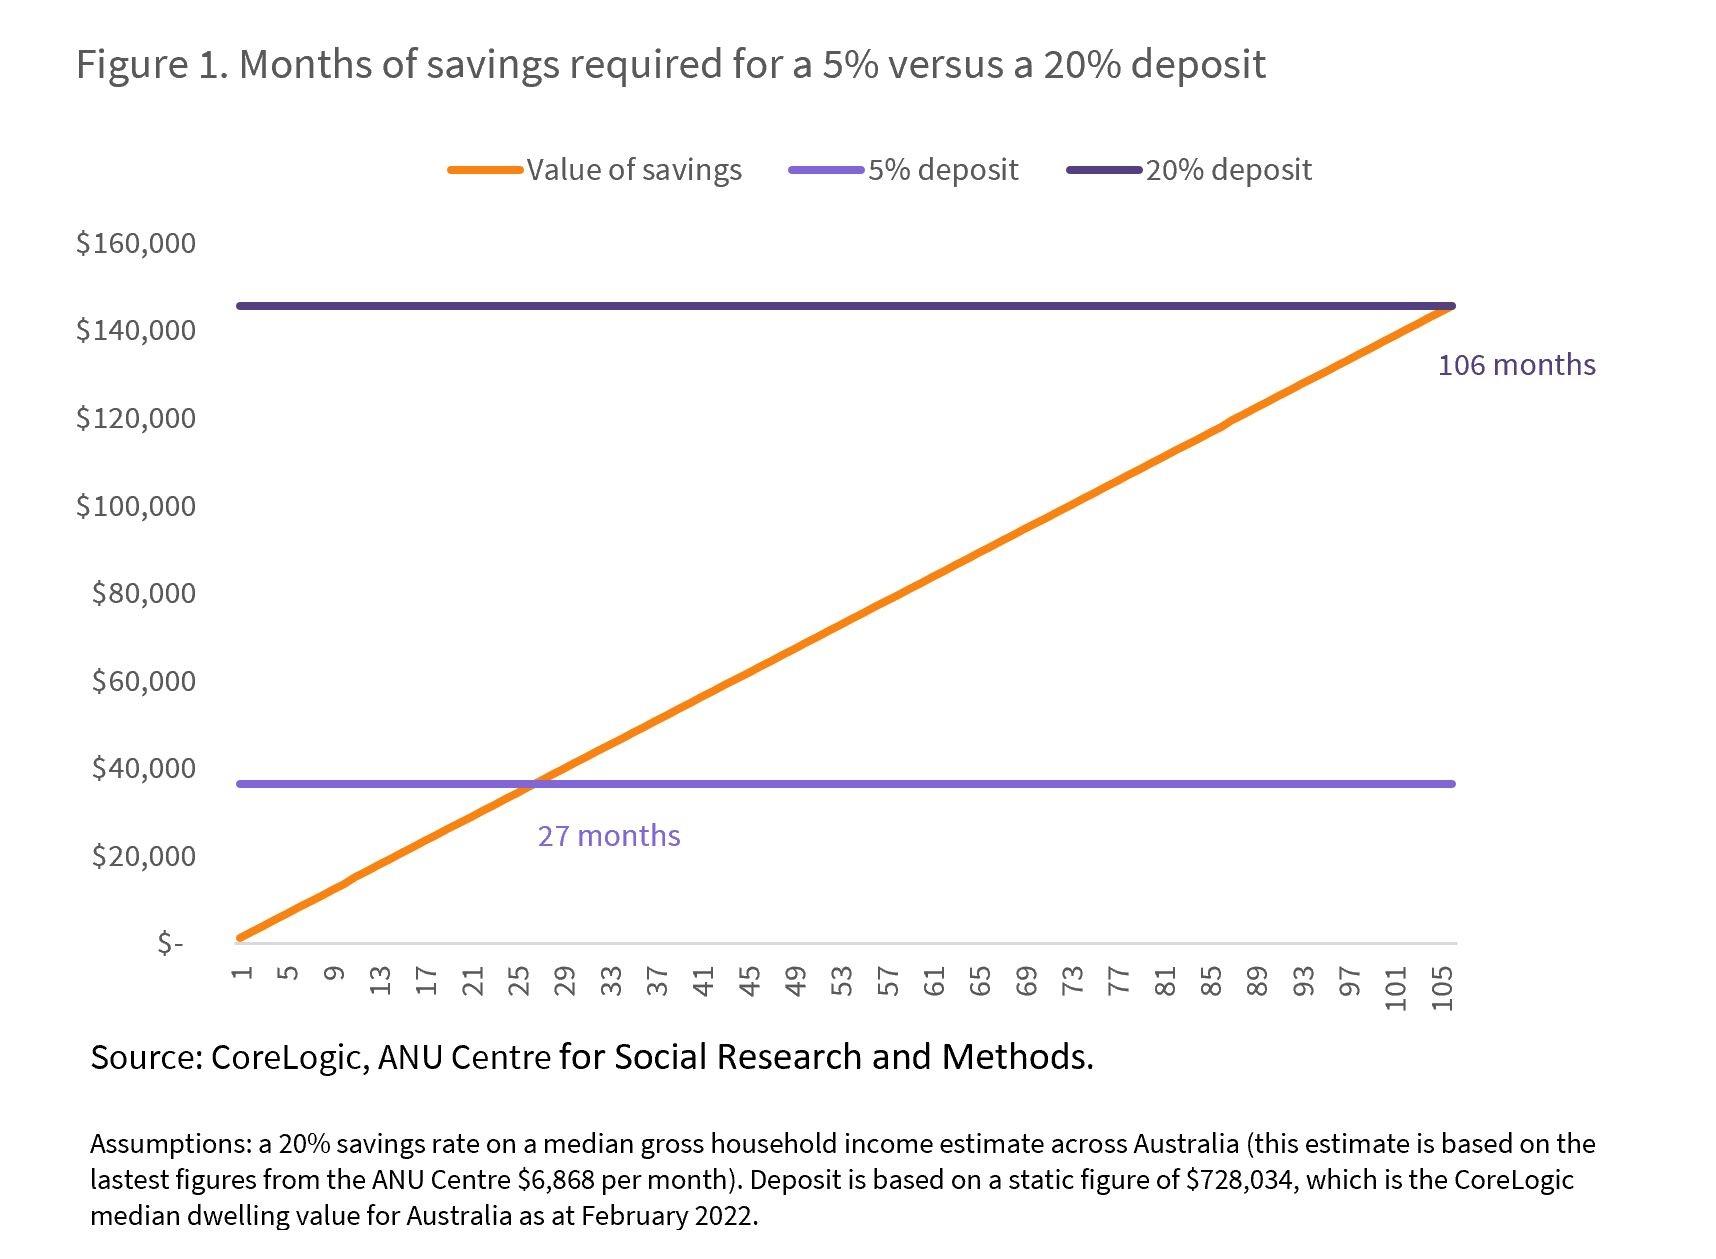 Months of savings required for a 5% versus a 20% deposit